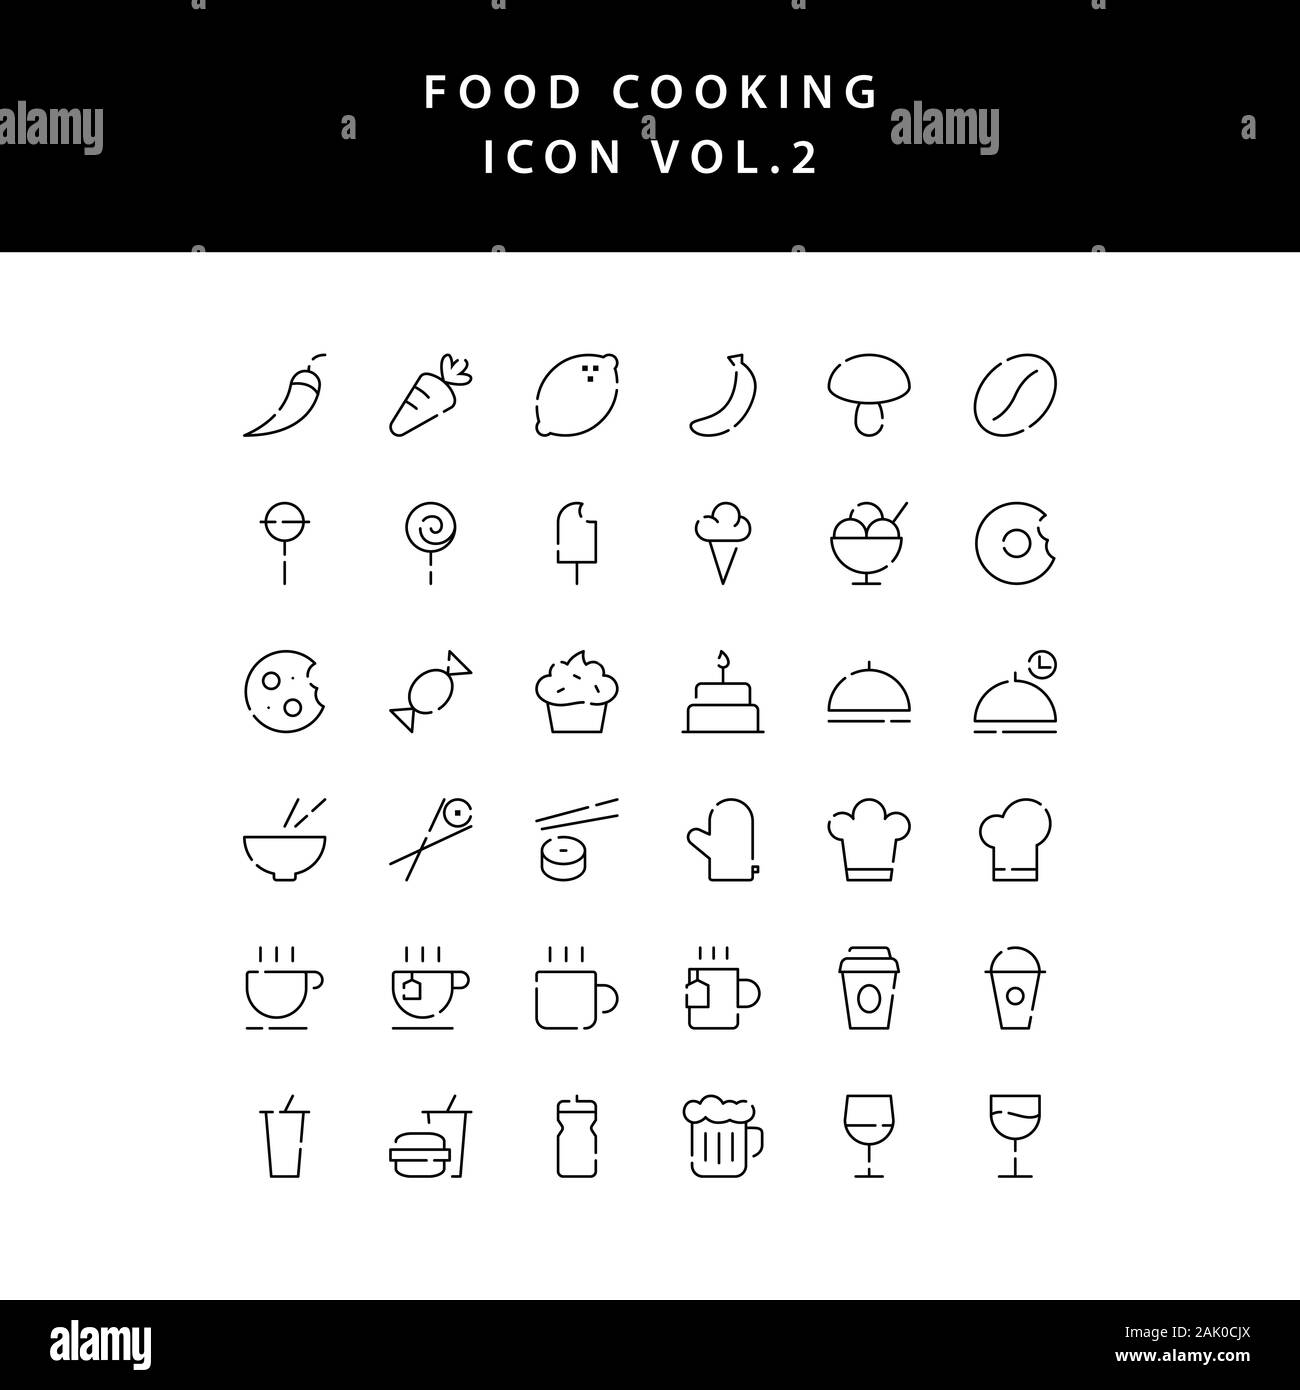 food cooking icon set outline set vol 2 Stock Vector